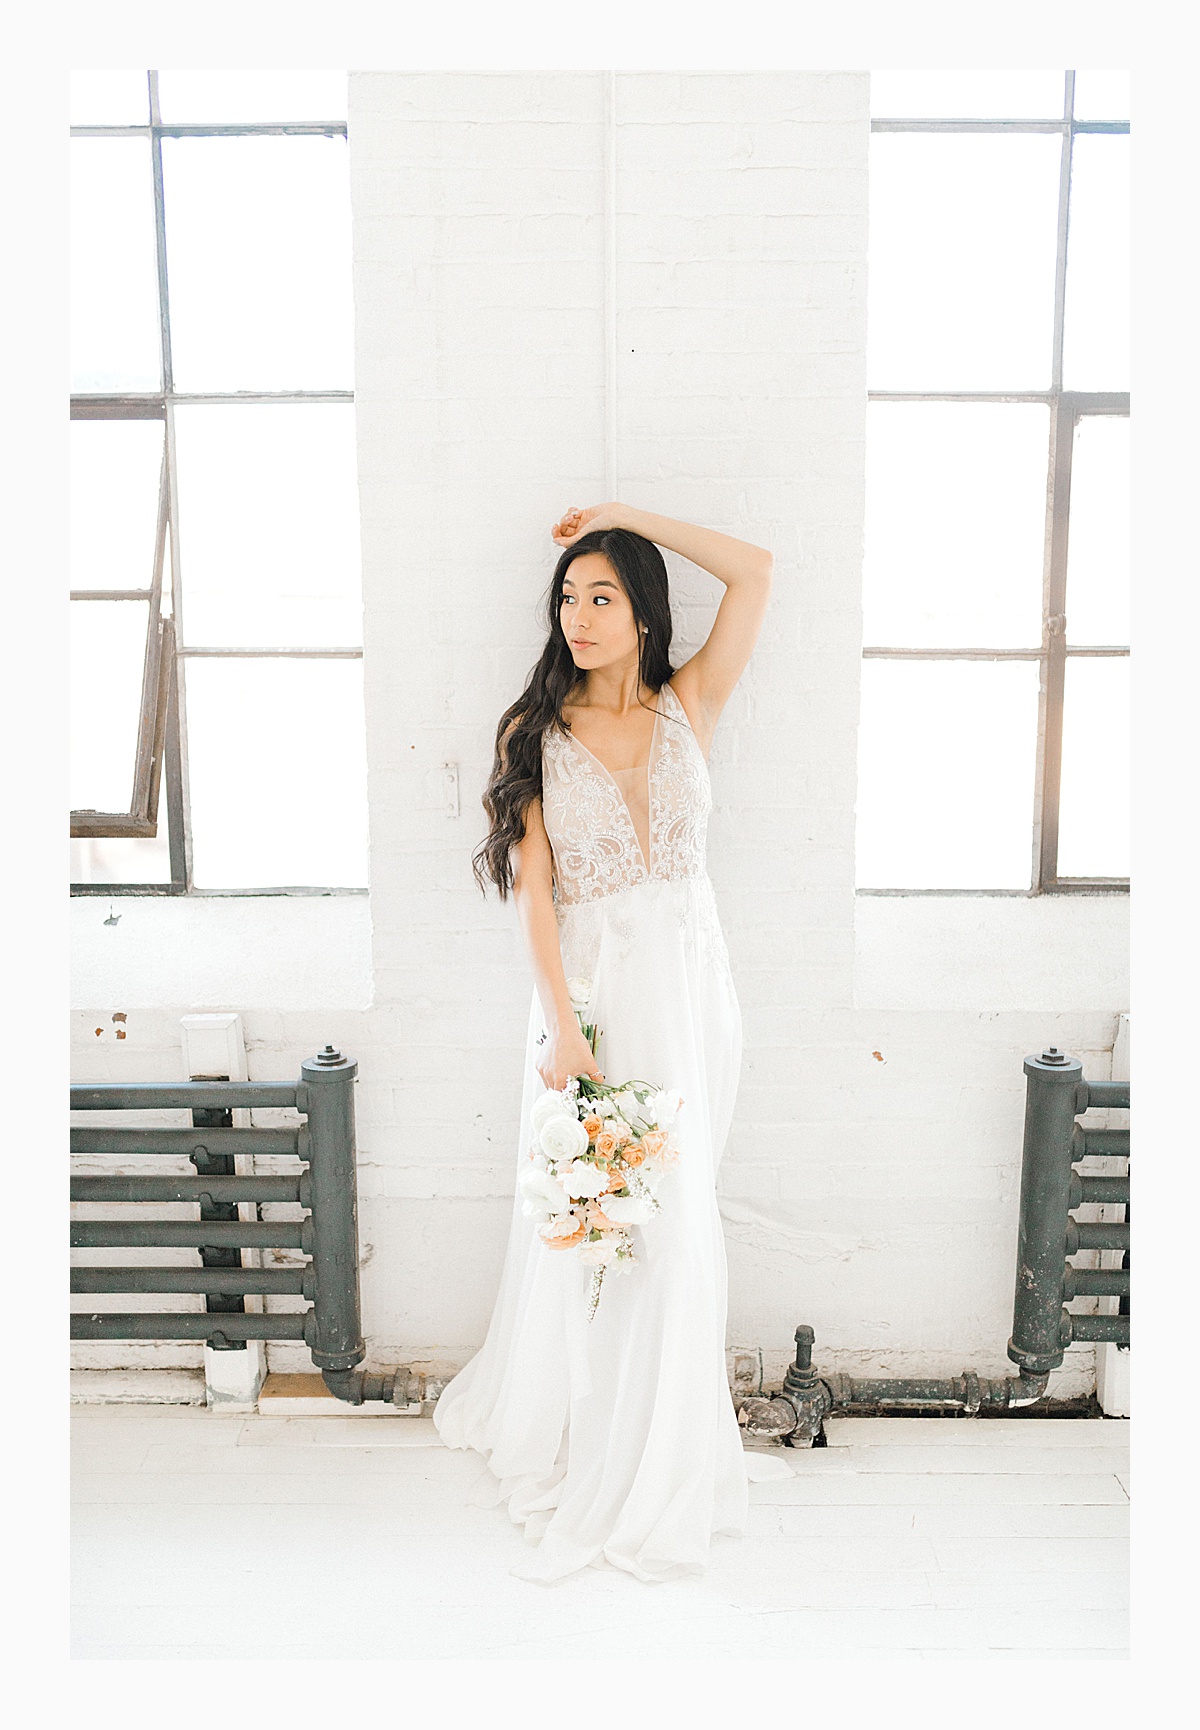 The Bemis Building in downtown Seattle is one of my favorite places to use for photo shoots!  This styled bridal shoot with touches of peach and white was dreamy.  #emmarosecompany #kindredpresets #seattlebride_0027.jpg